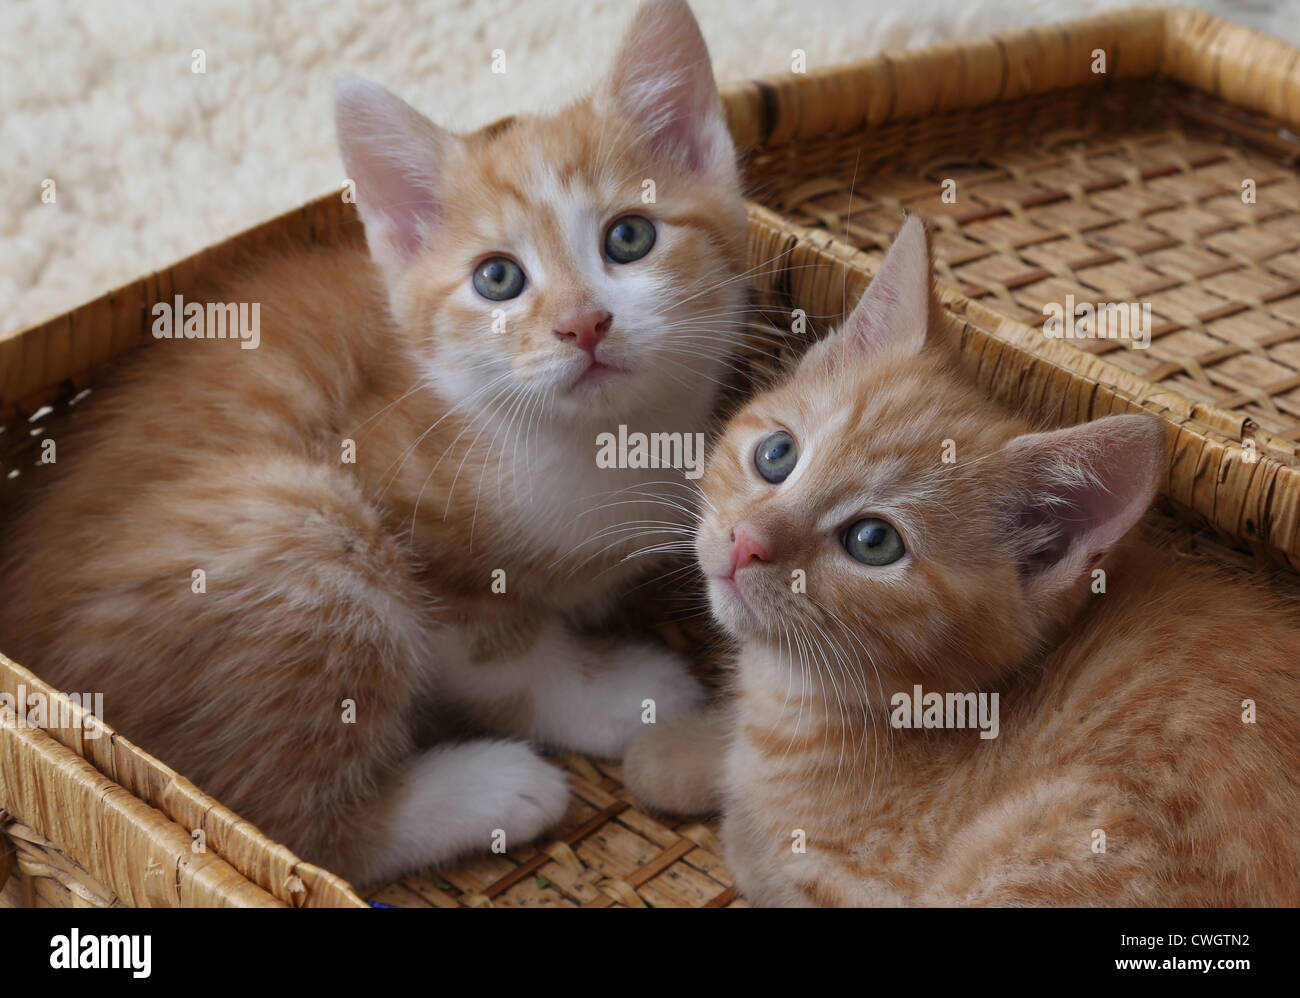 Ginger Kittens Laying In A Wicker Picnic Basket Stock Photo